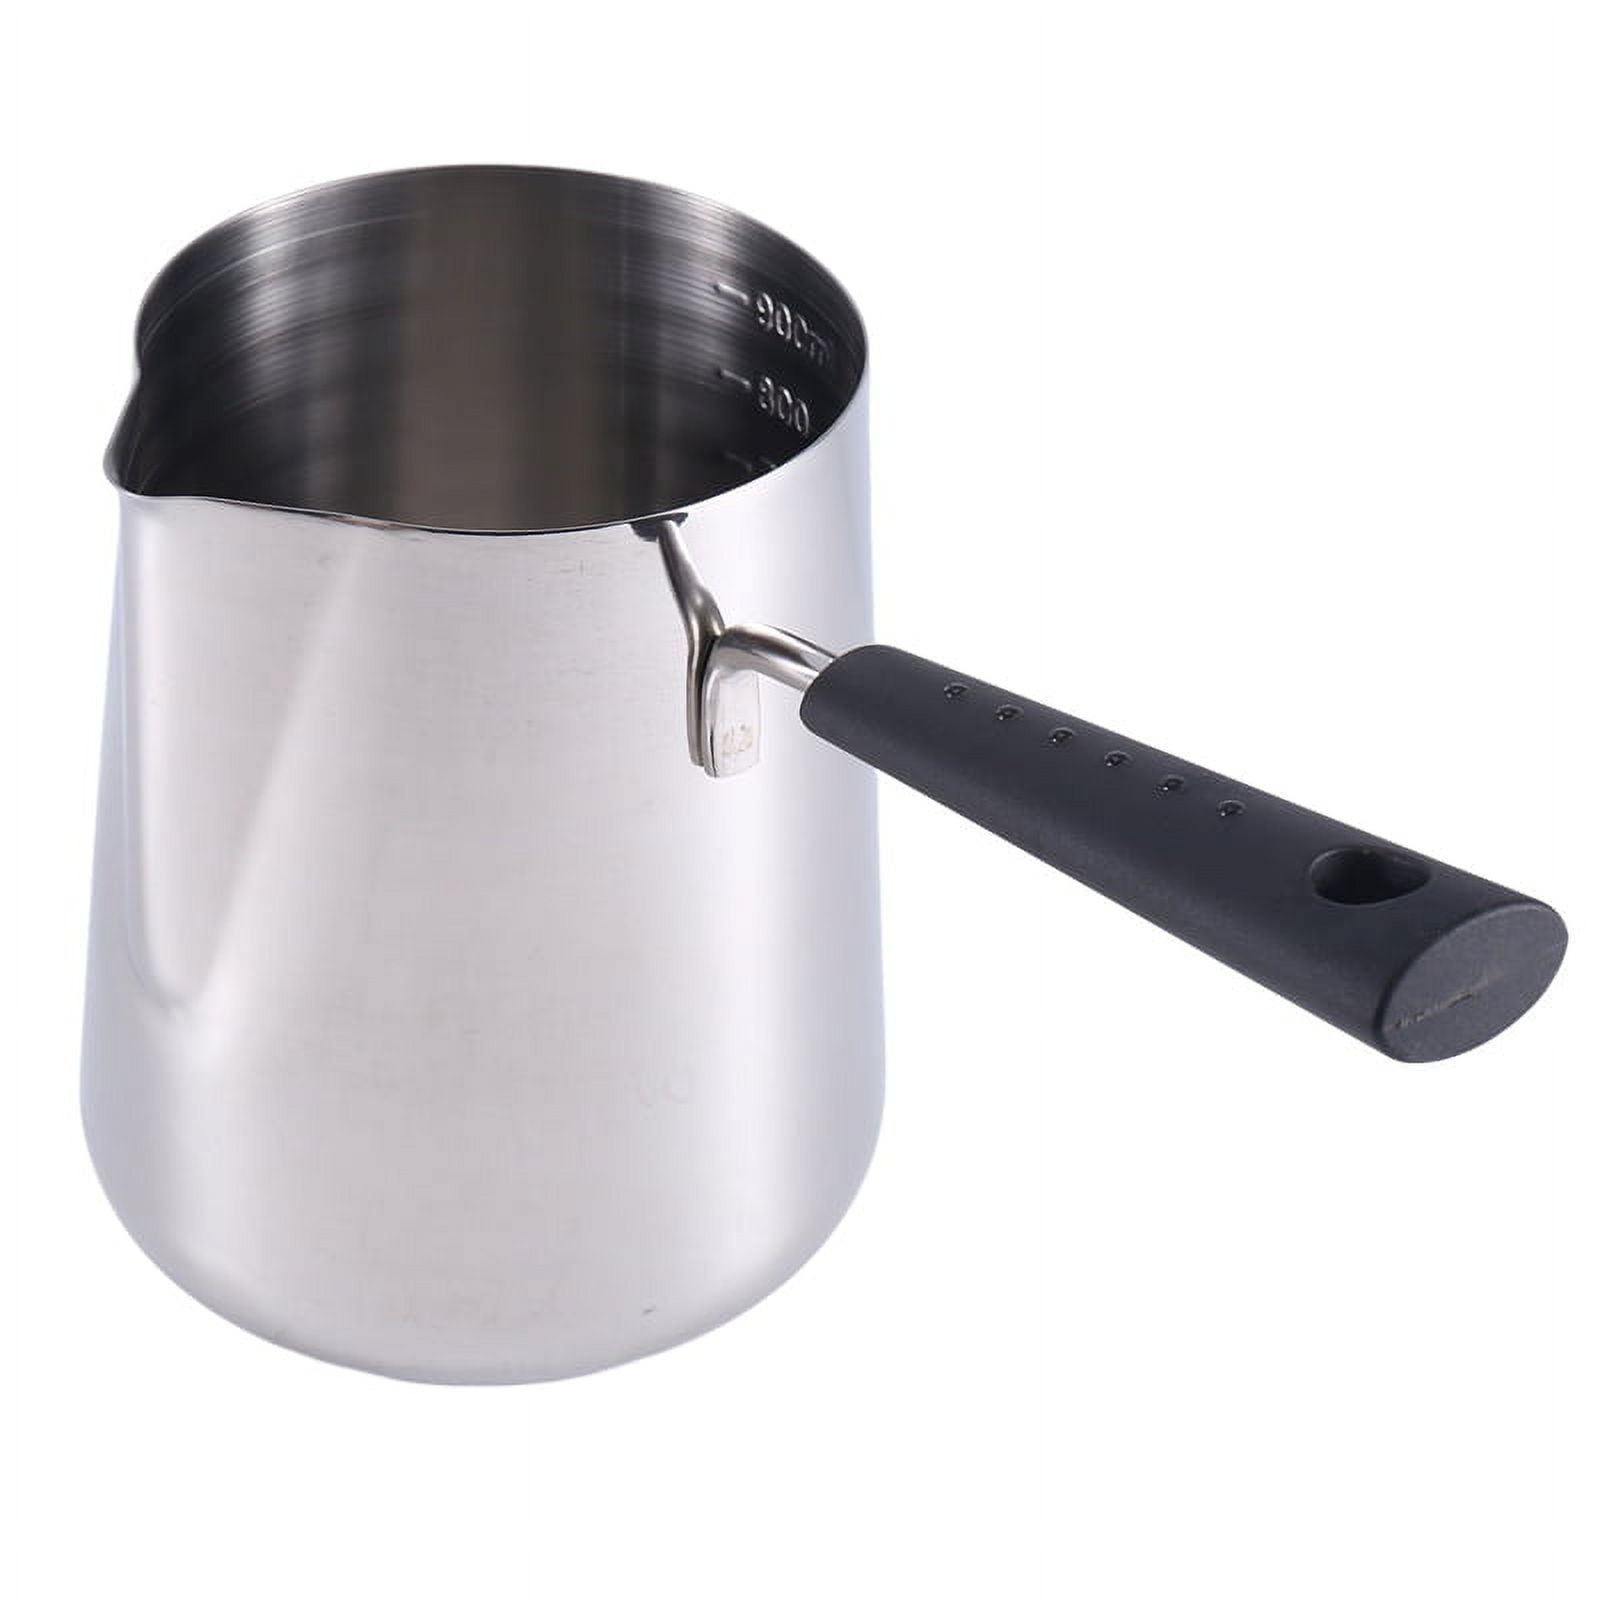 Small Stainless Steel Milk Warmer Pot with Handle Butter Chocolate Melting Pot  Saucepan with Pour Spout